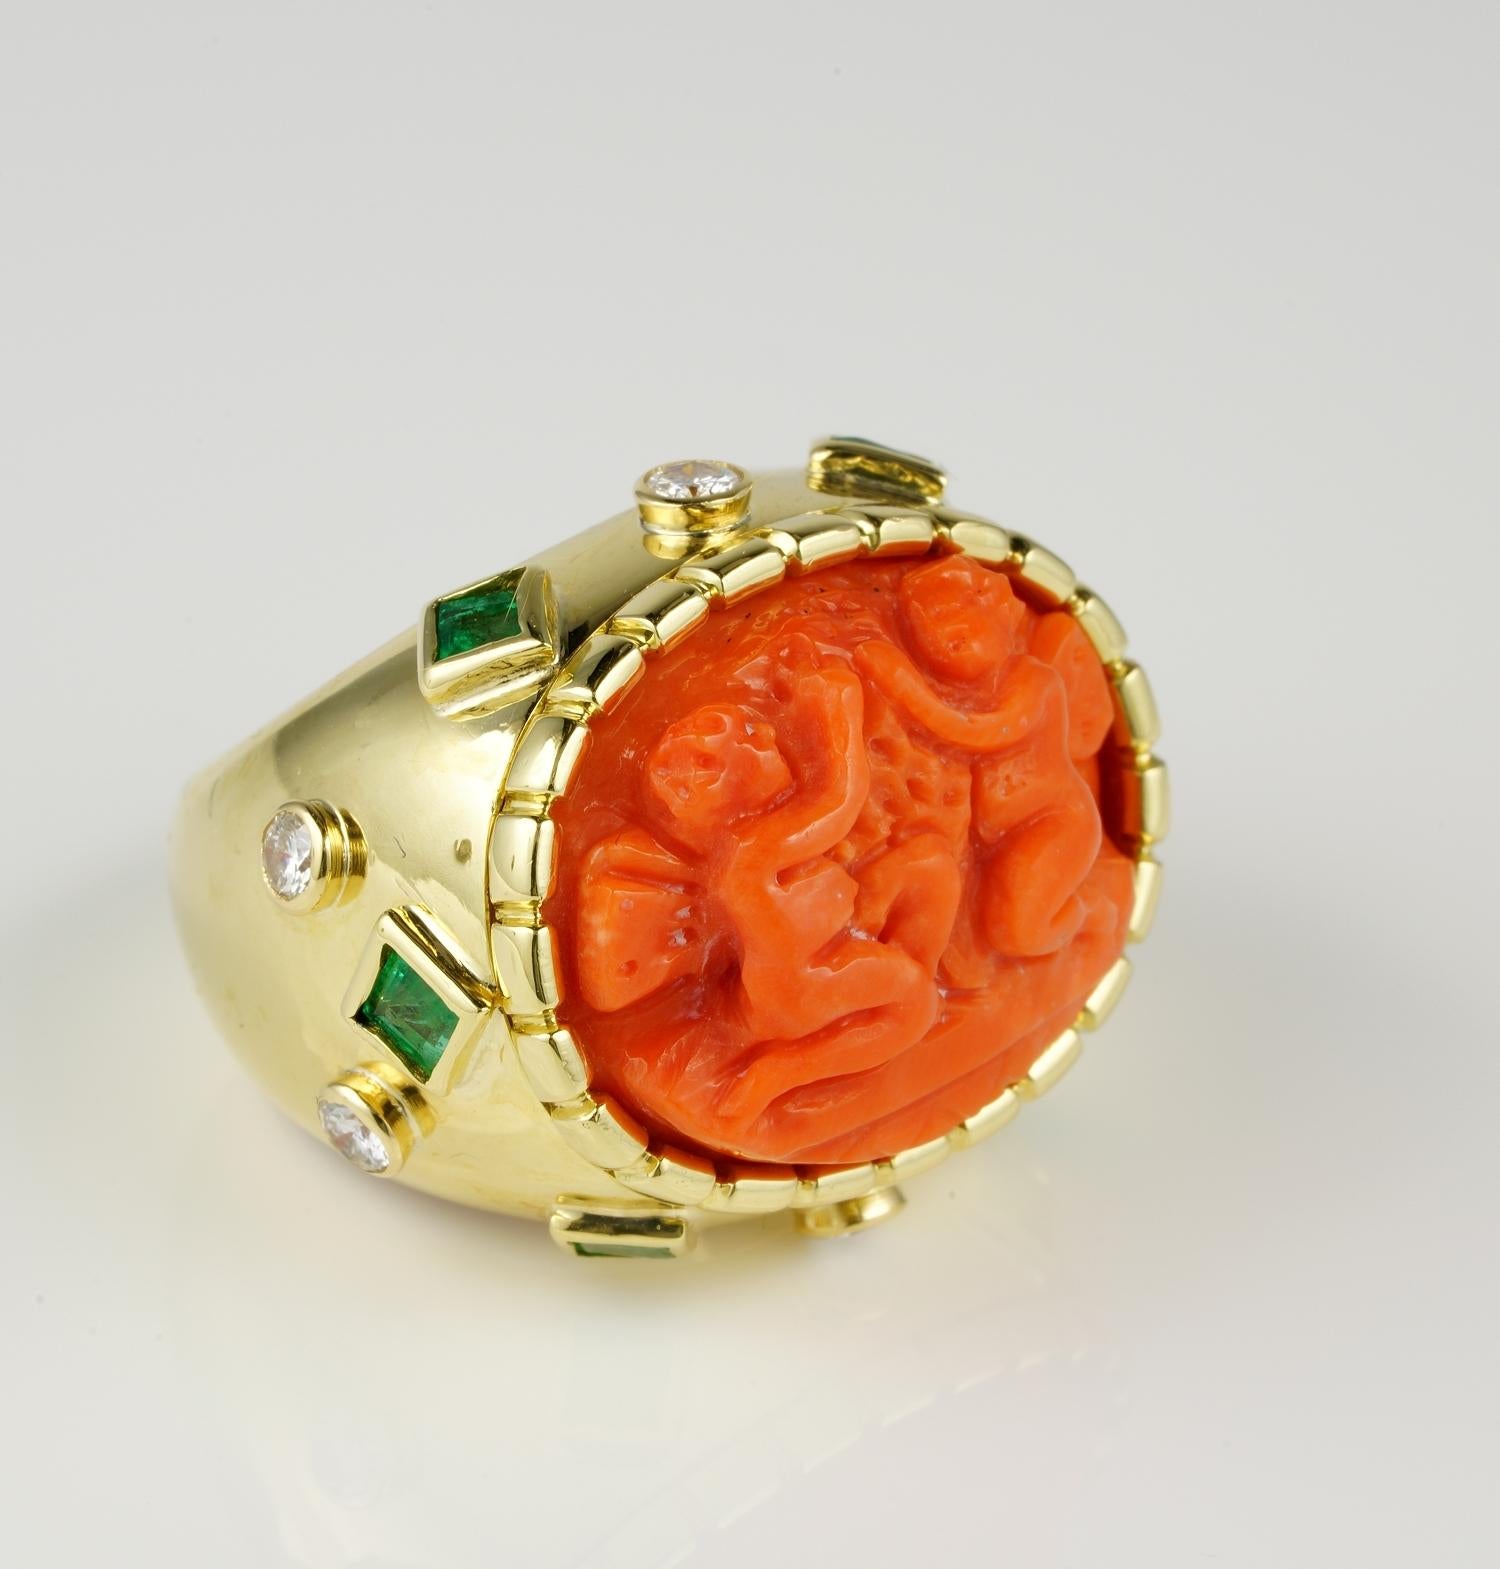 Seas Meet Earth

An absolutely Stunning mid century ring of exclusive design, enriched with fabulous earth mined gemstones, including gold which is mined from earth too, crowned by the king of Seas “Coral”
An amazing combination rendered by various